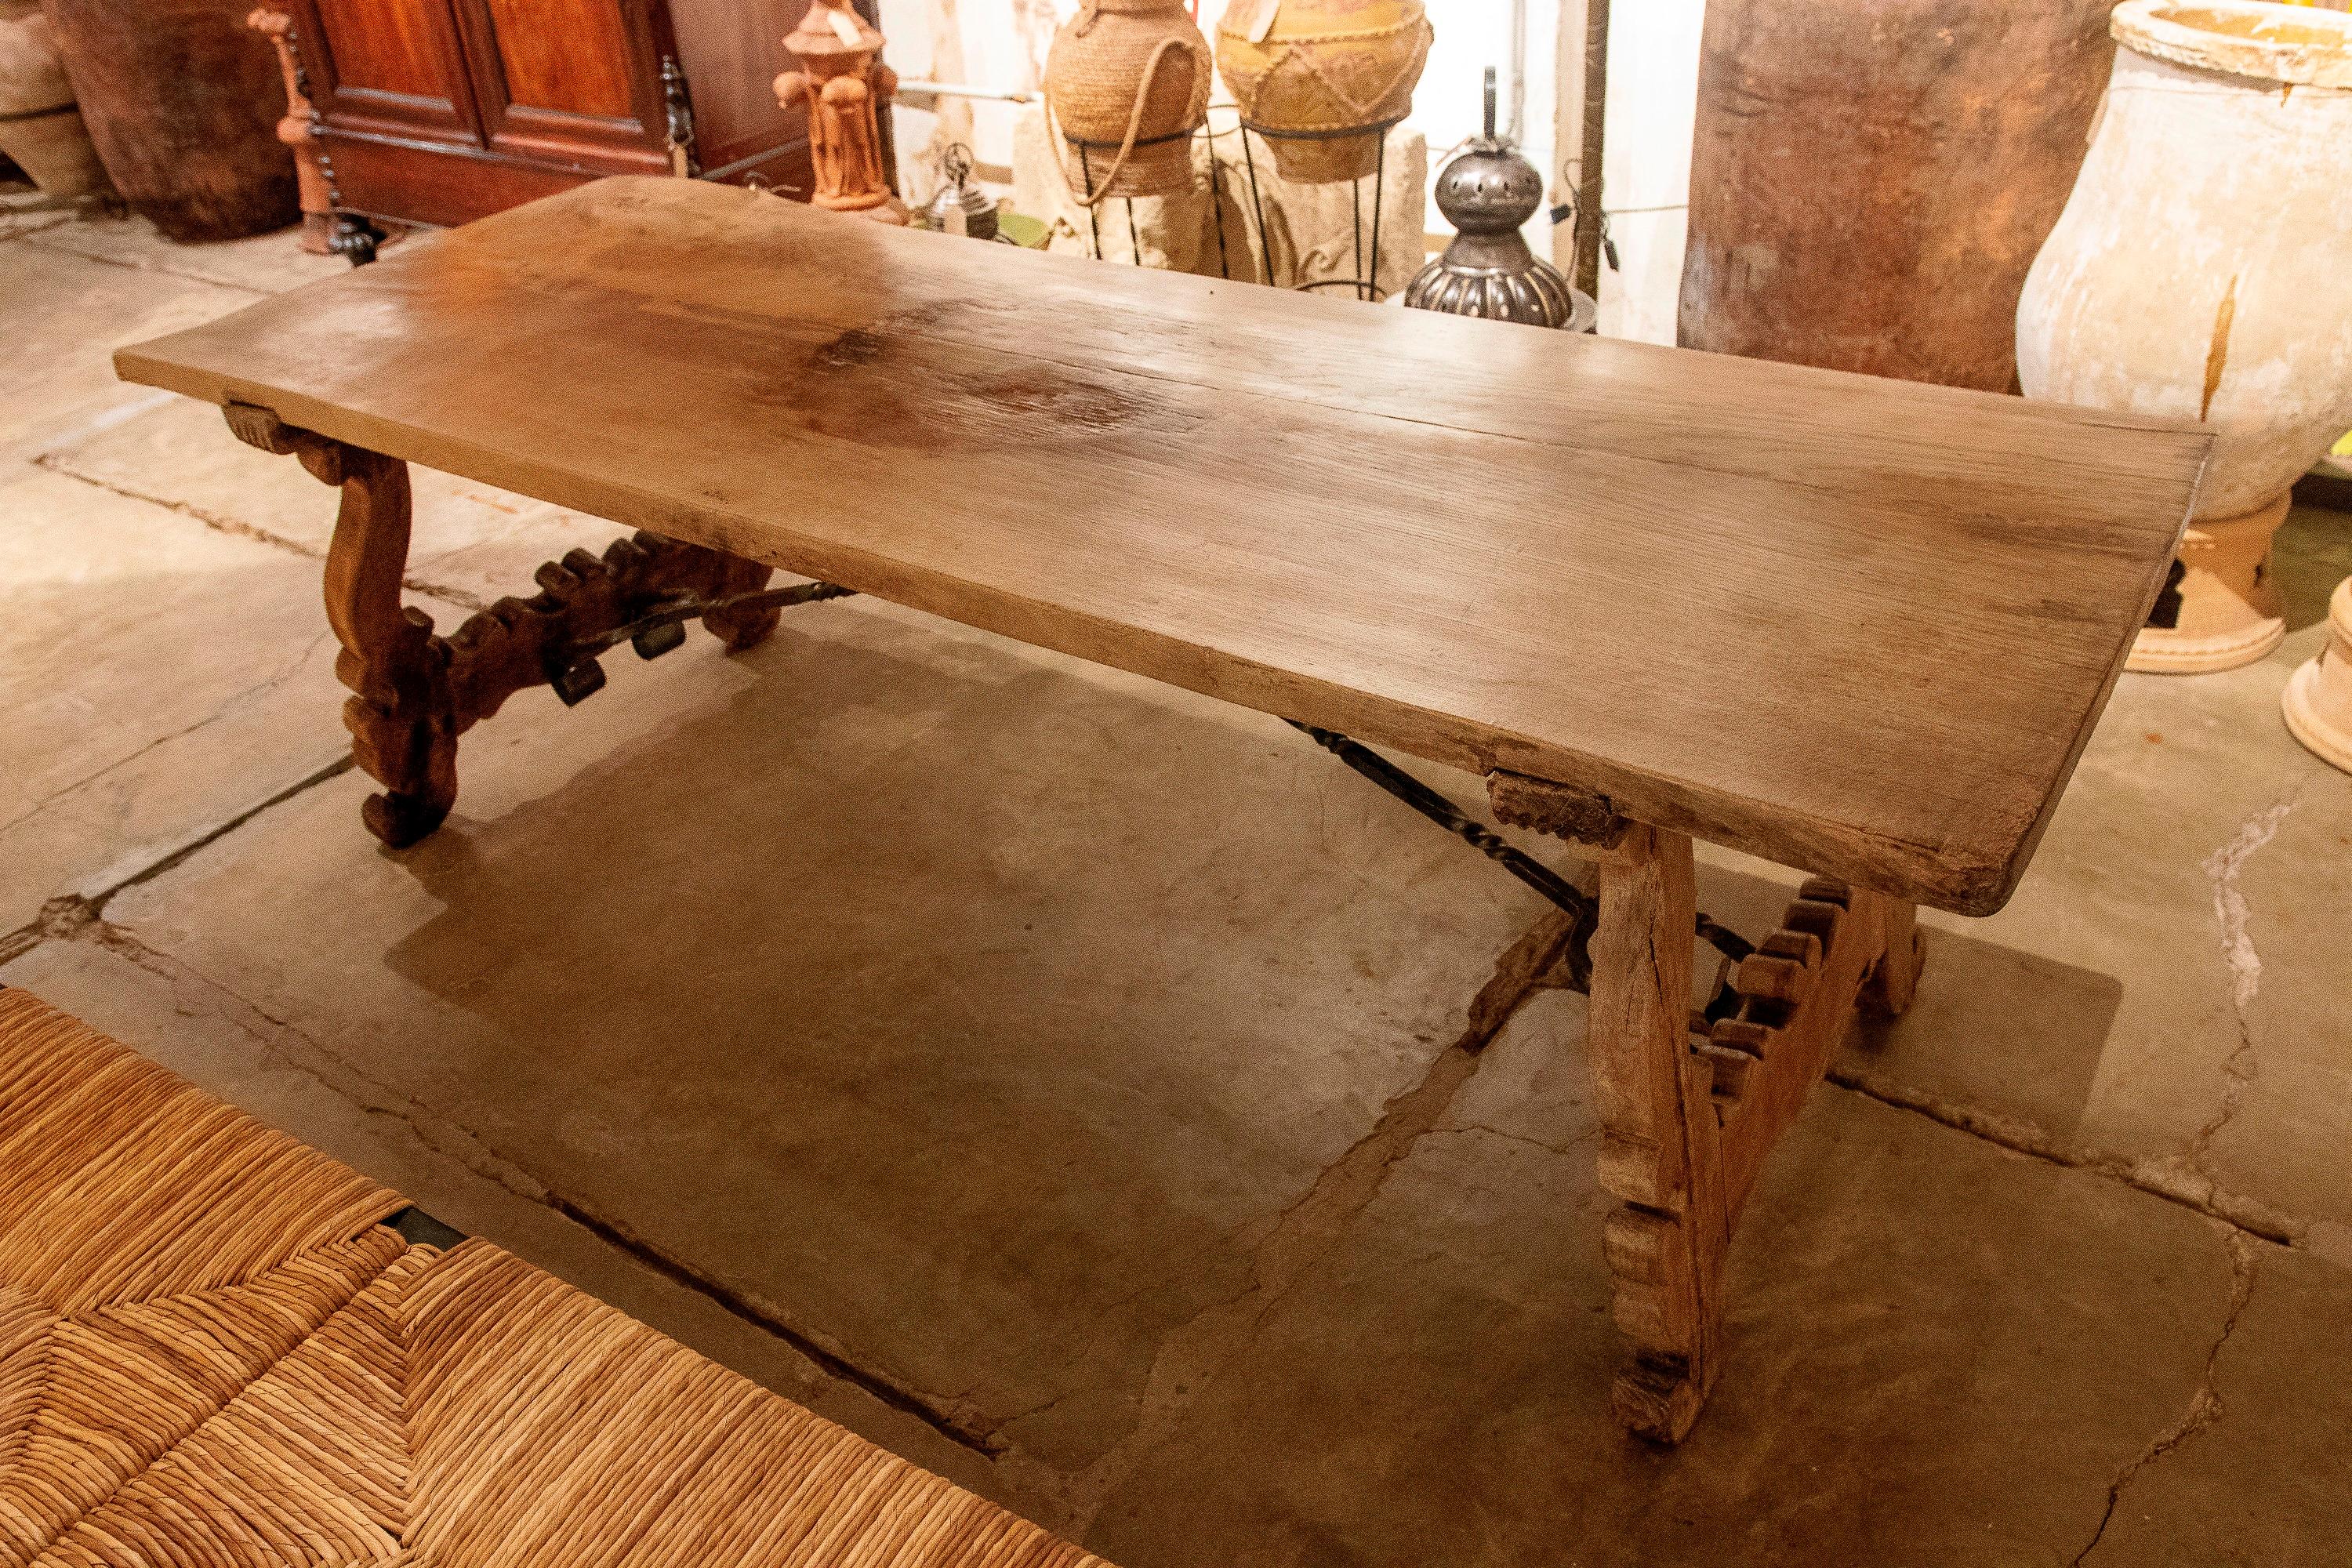 Spanish Large Wooden Table with Hand-Carved Legs and Original Iron Fittings For Sale 10